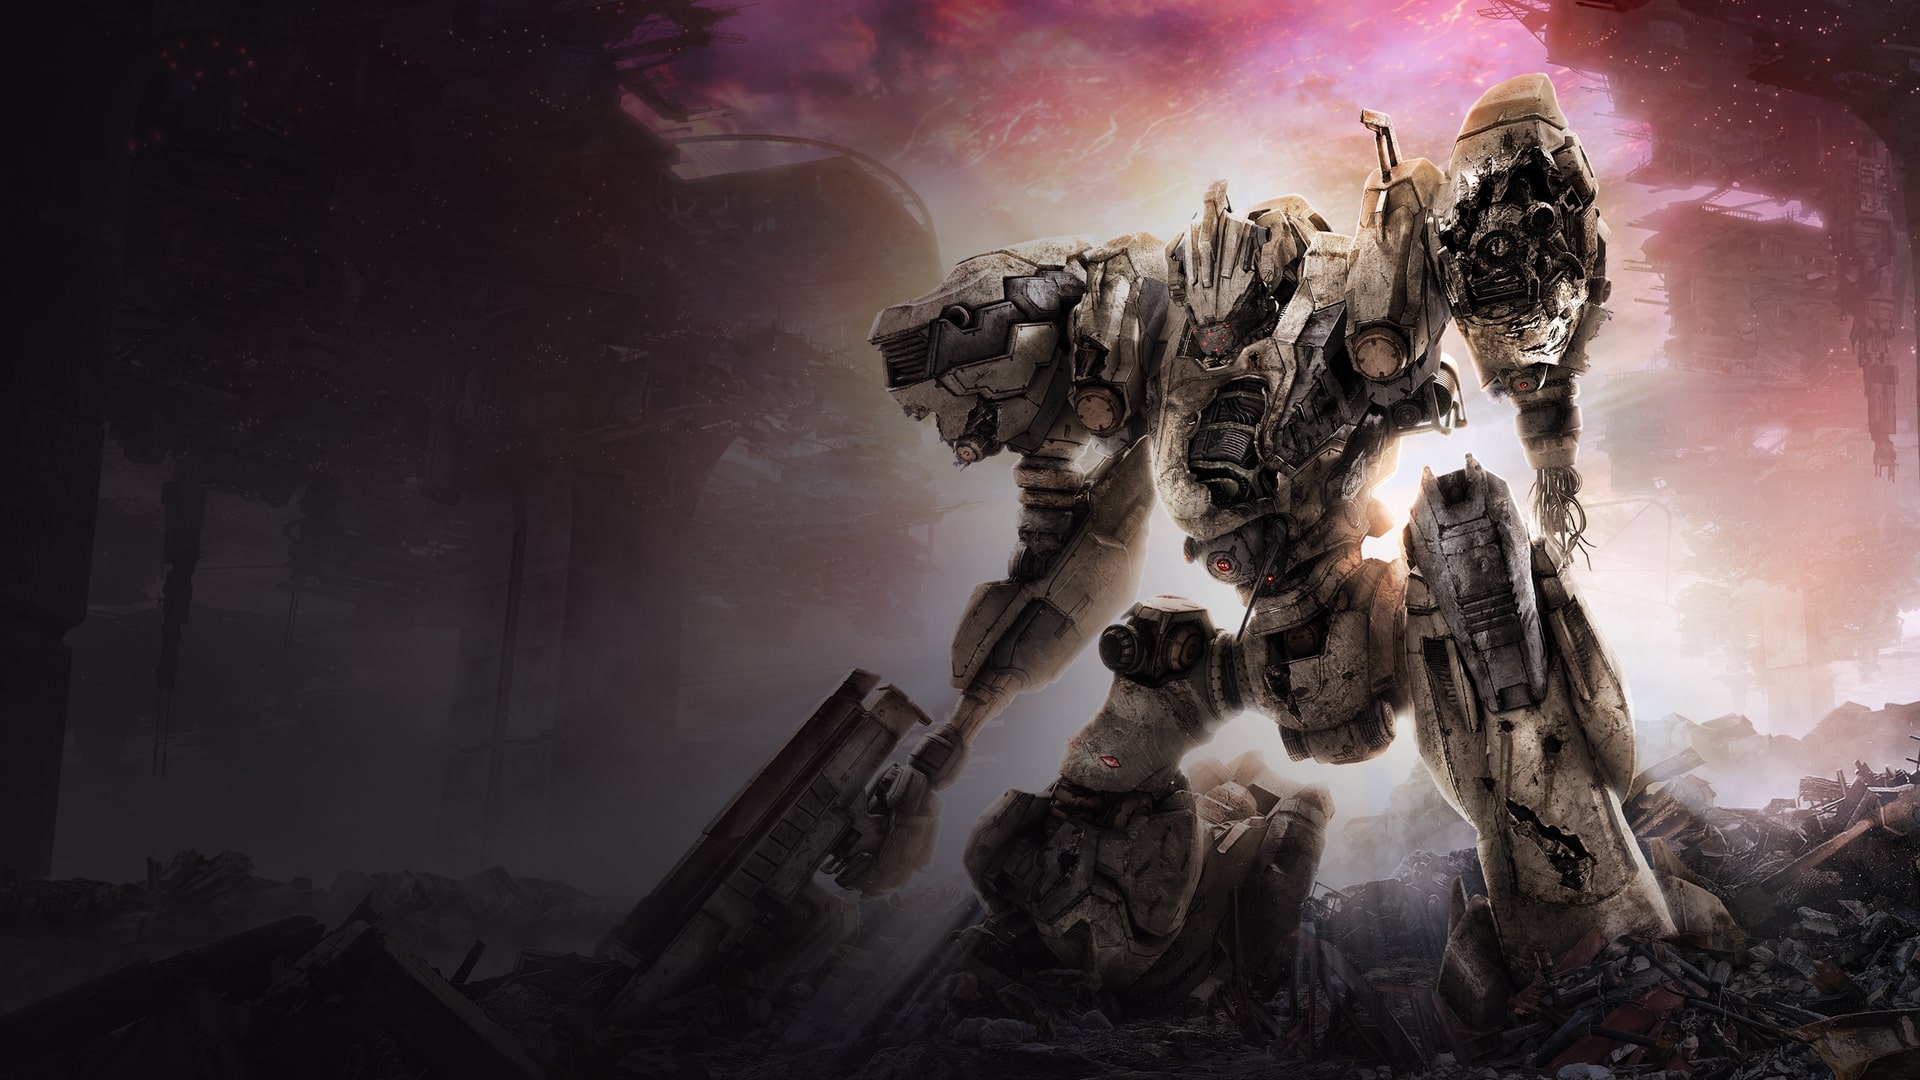 PS5 Armored Core VI Fires of Rubicon (R3) — GAMELINE